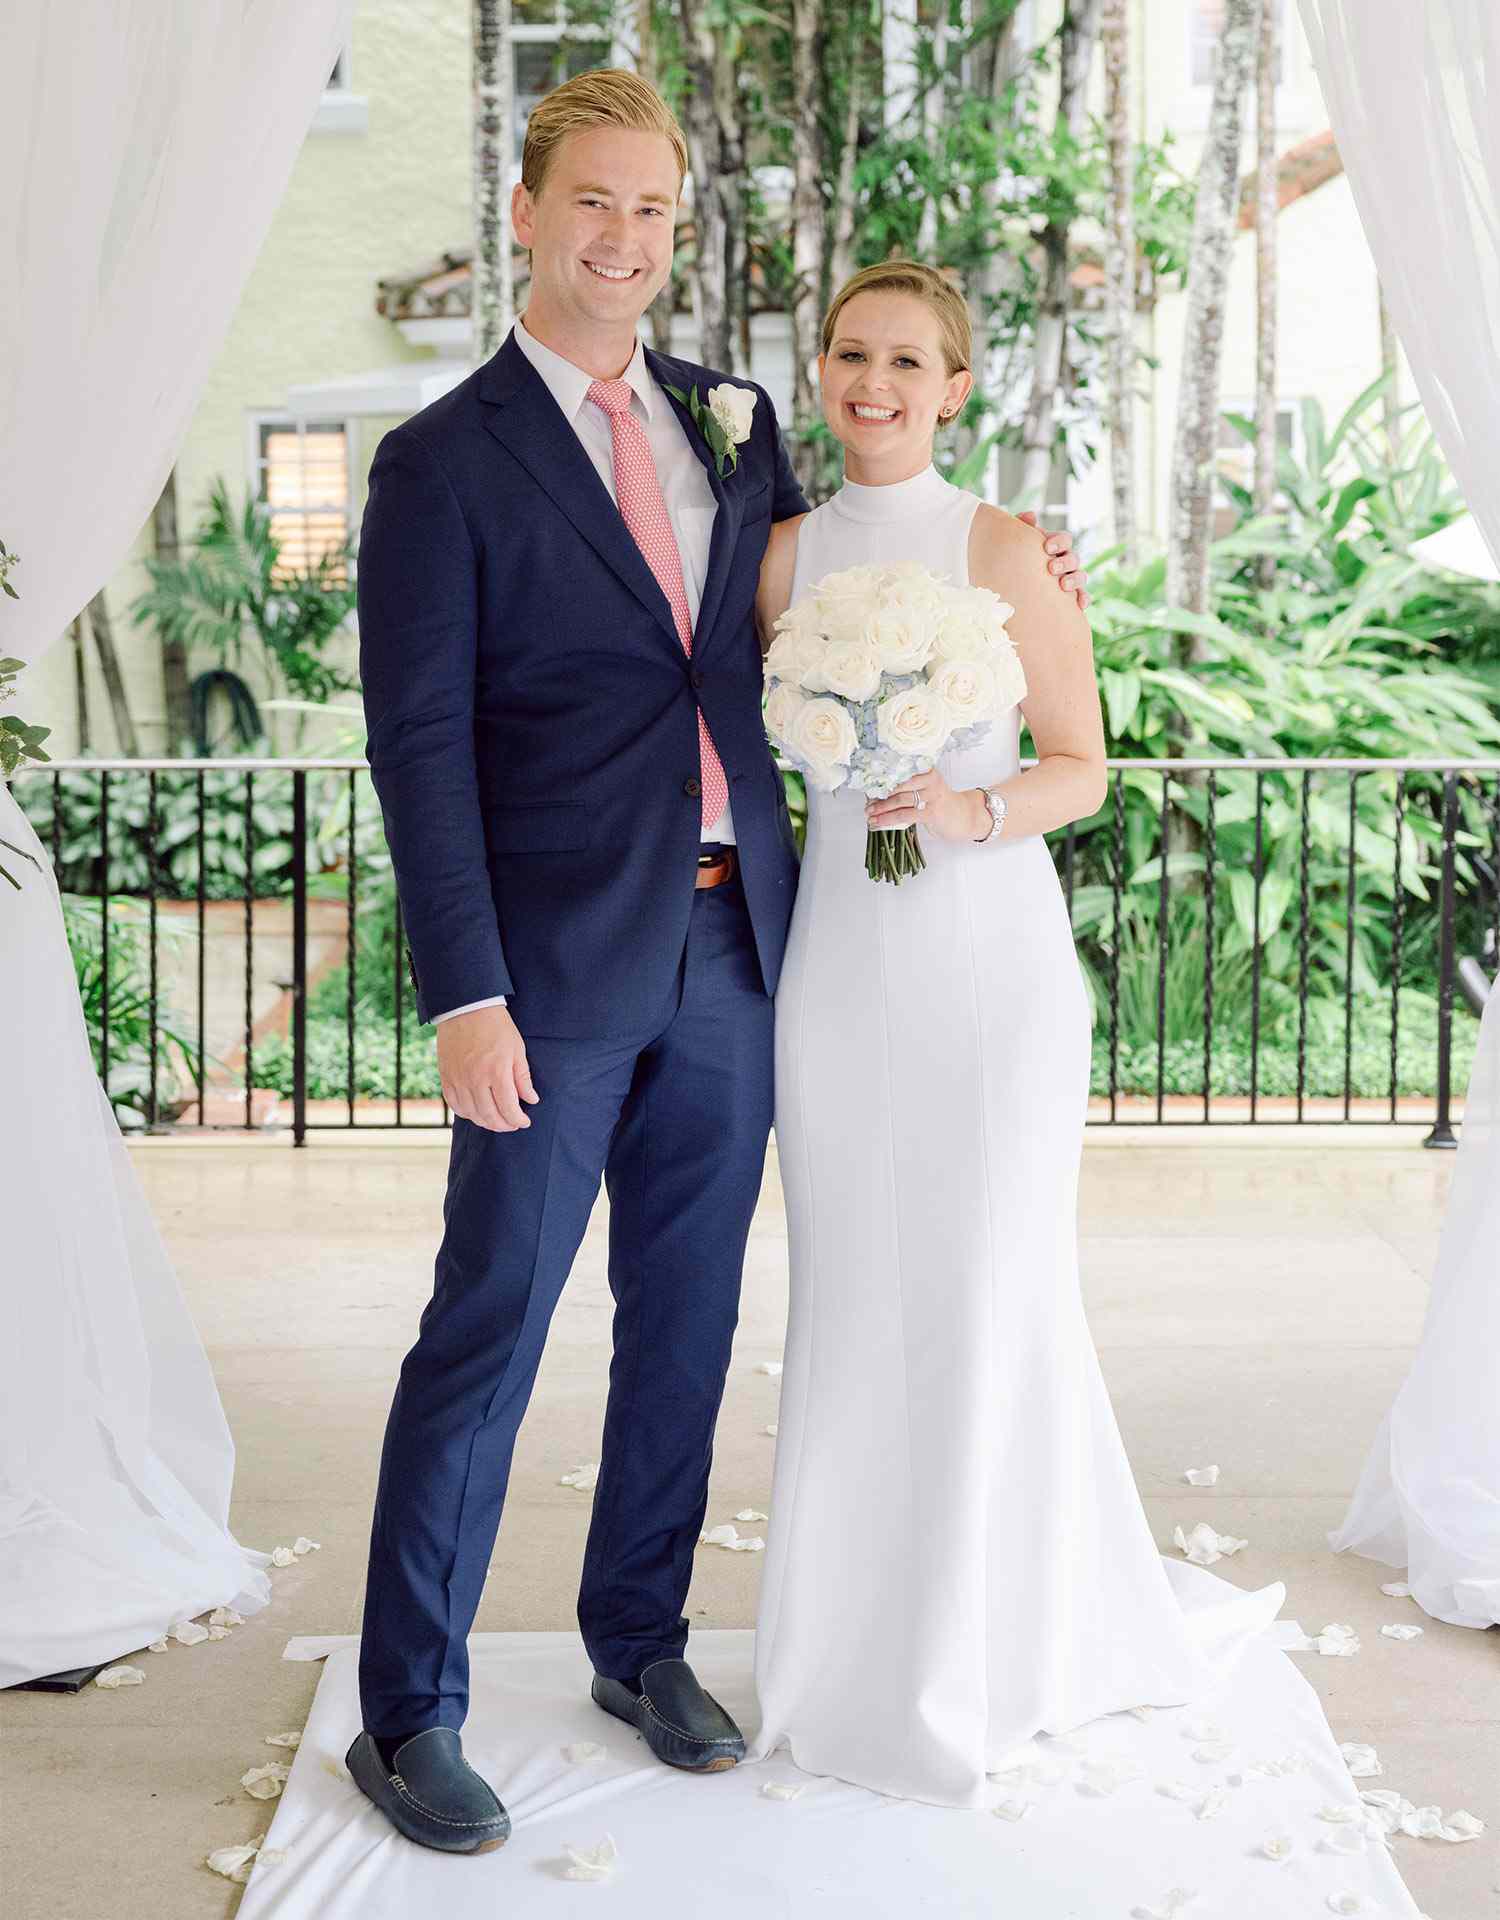 Who Is Peter Doocy Married To? Wife And Family Details On the Fox News Presenter